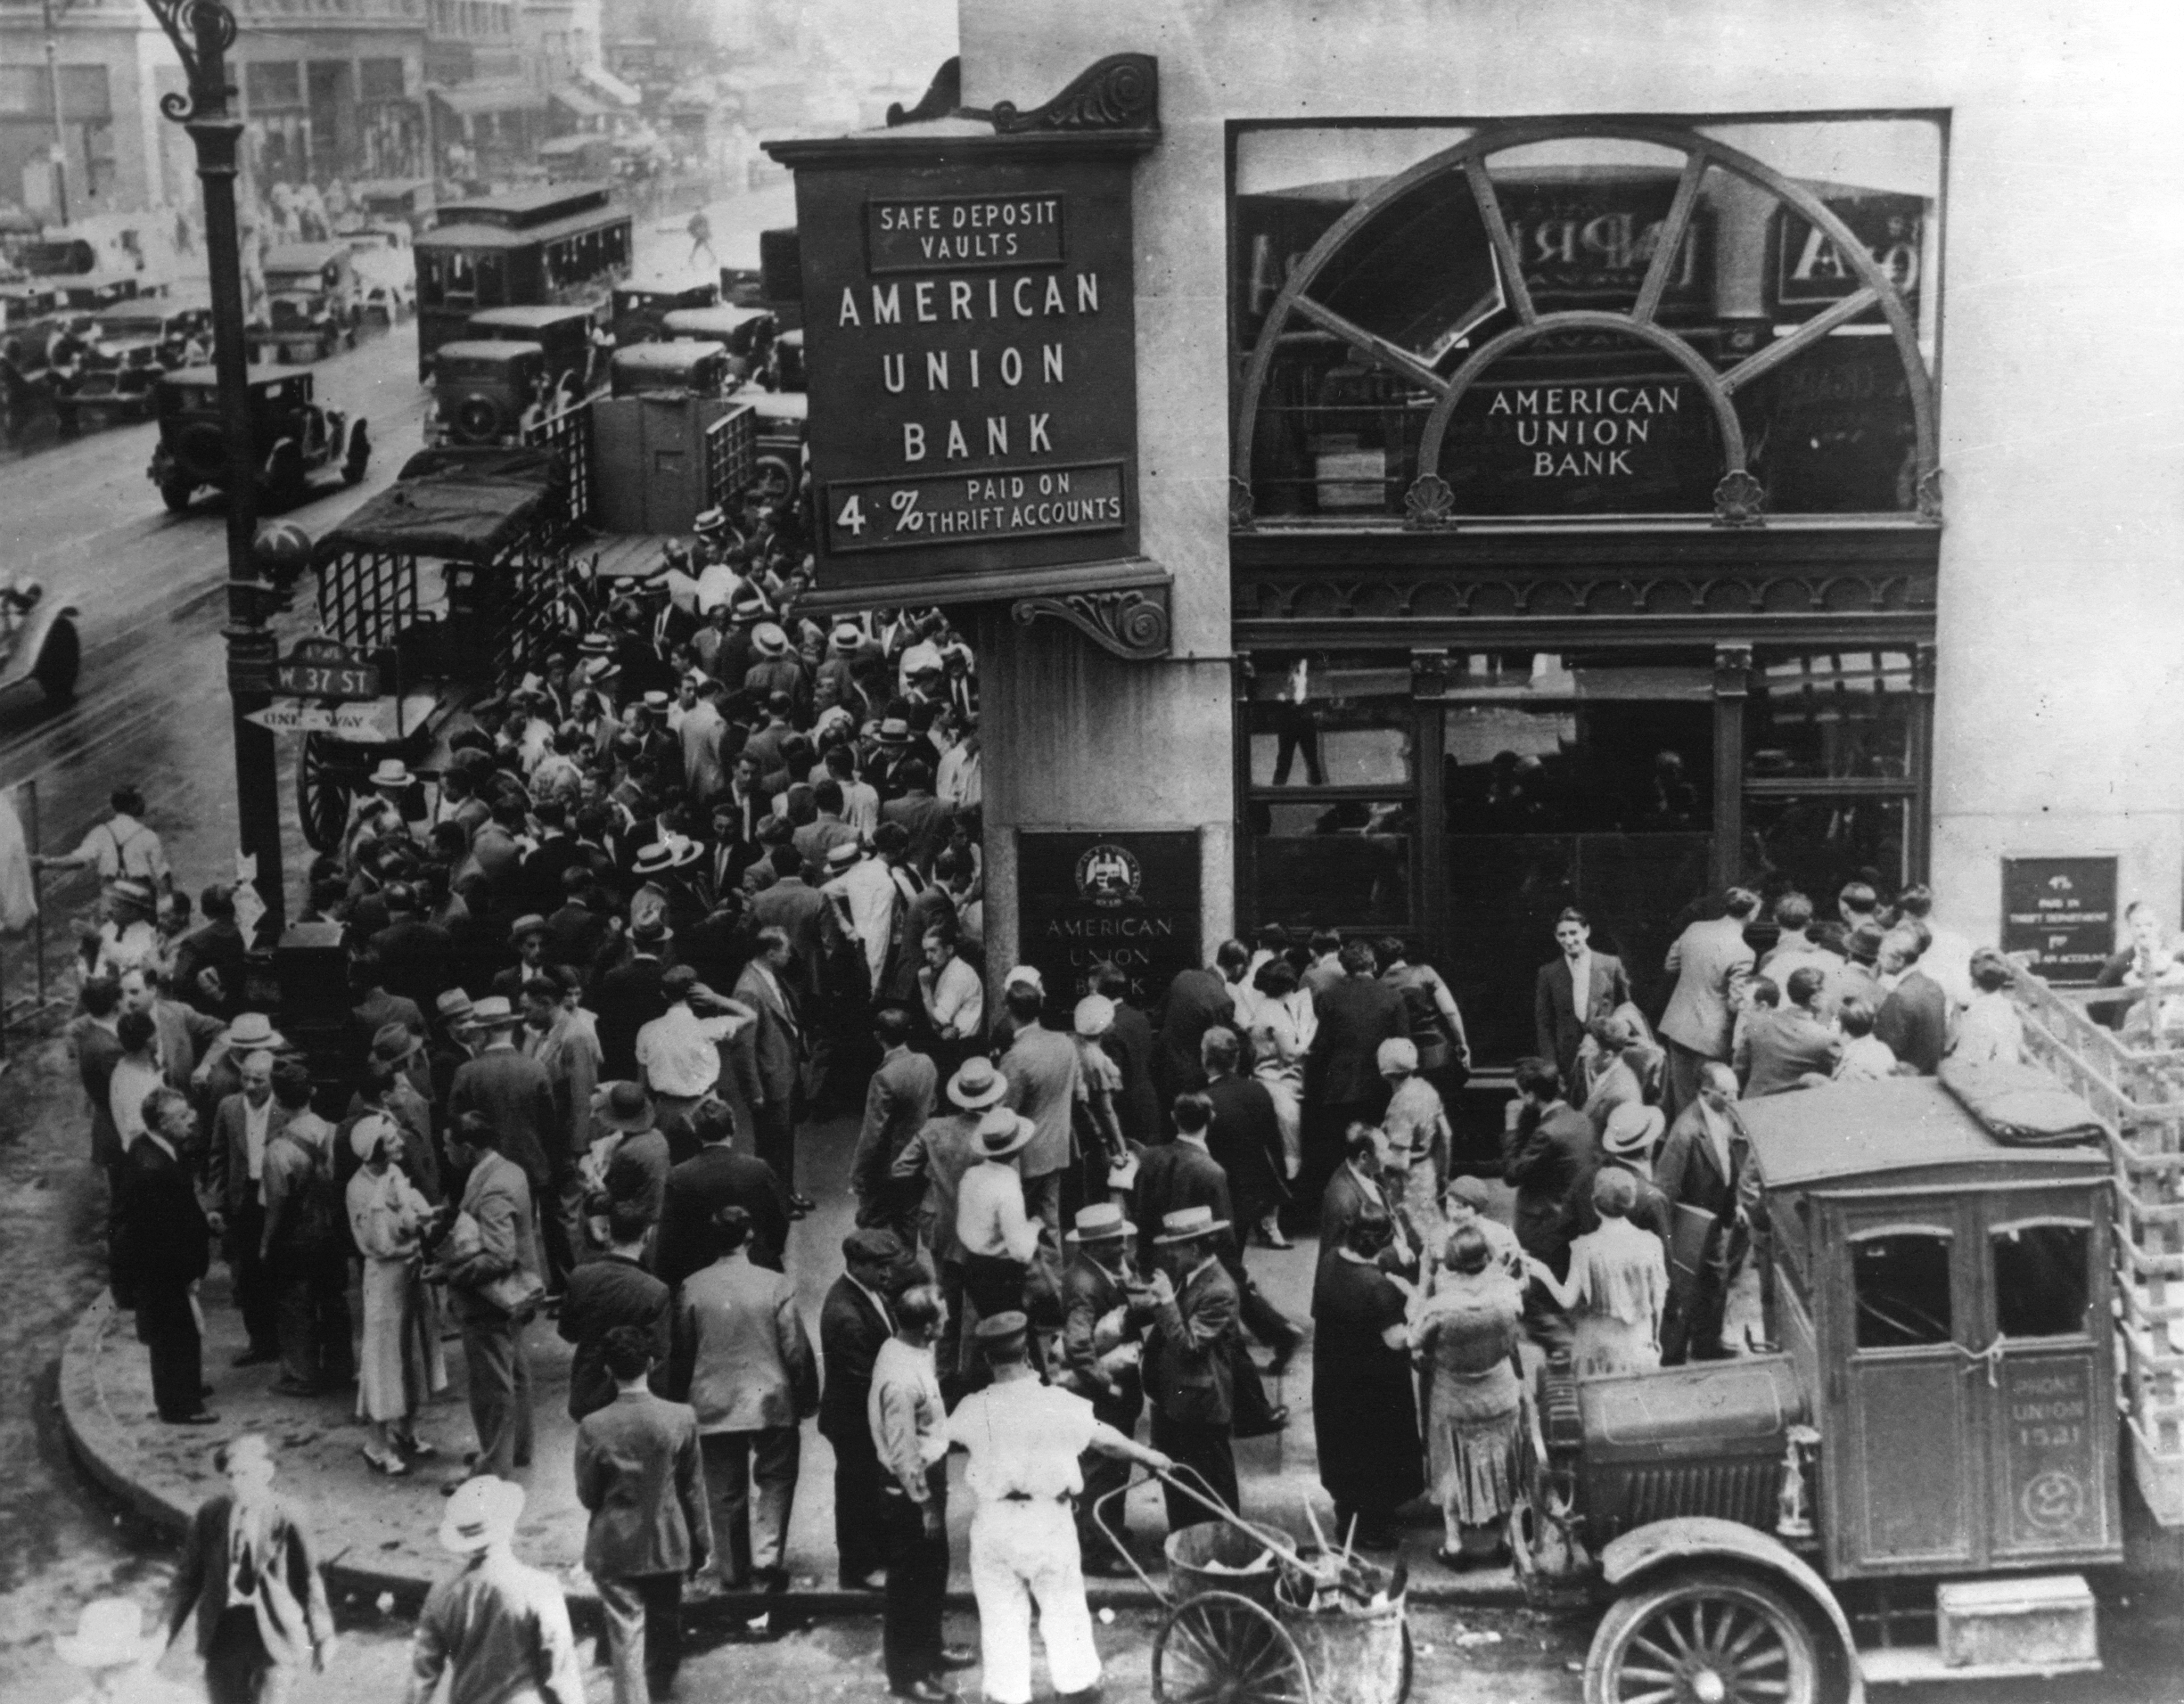 Crowd at New York's American Union Bank during a bank run early in the Great Depression. The Bank opened in 1917 and went out of business on June 30, 1931. Photo: Unknown. Public Domain.